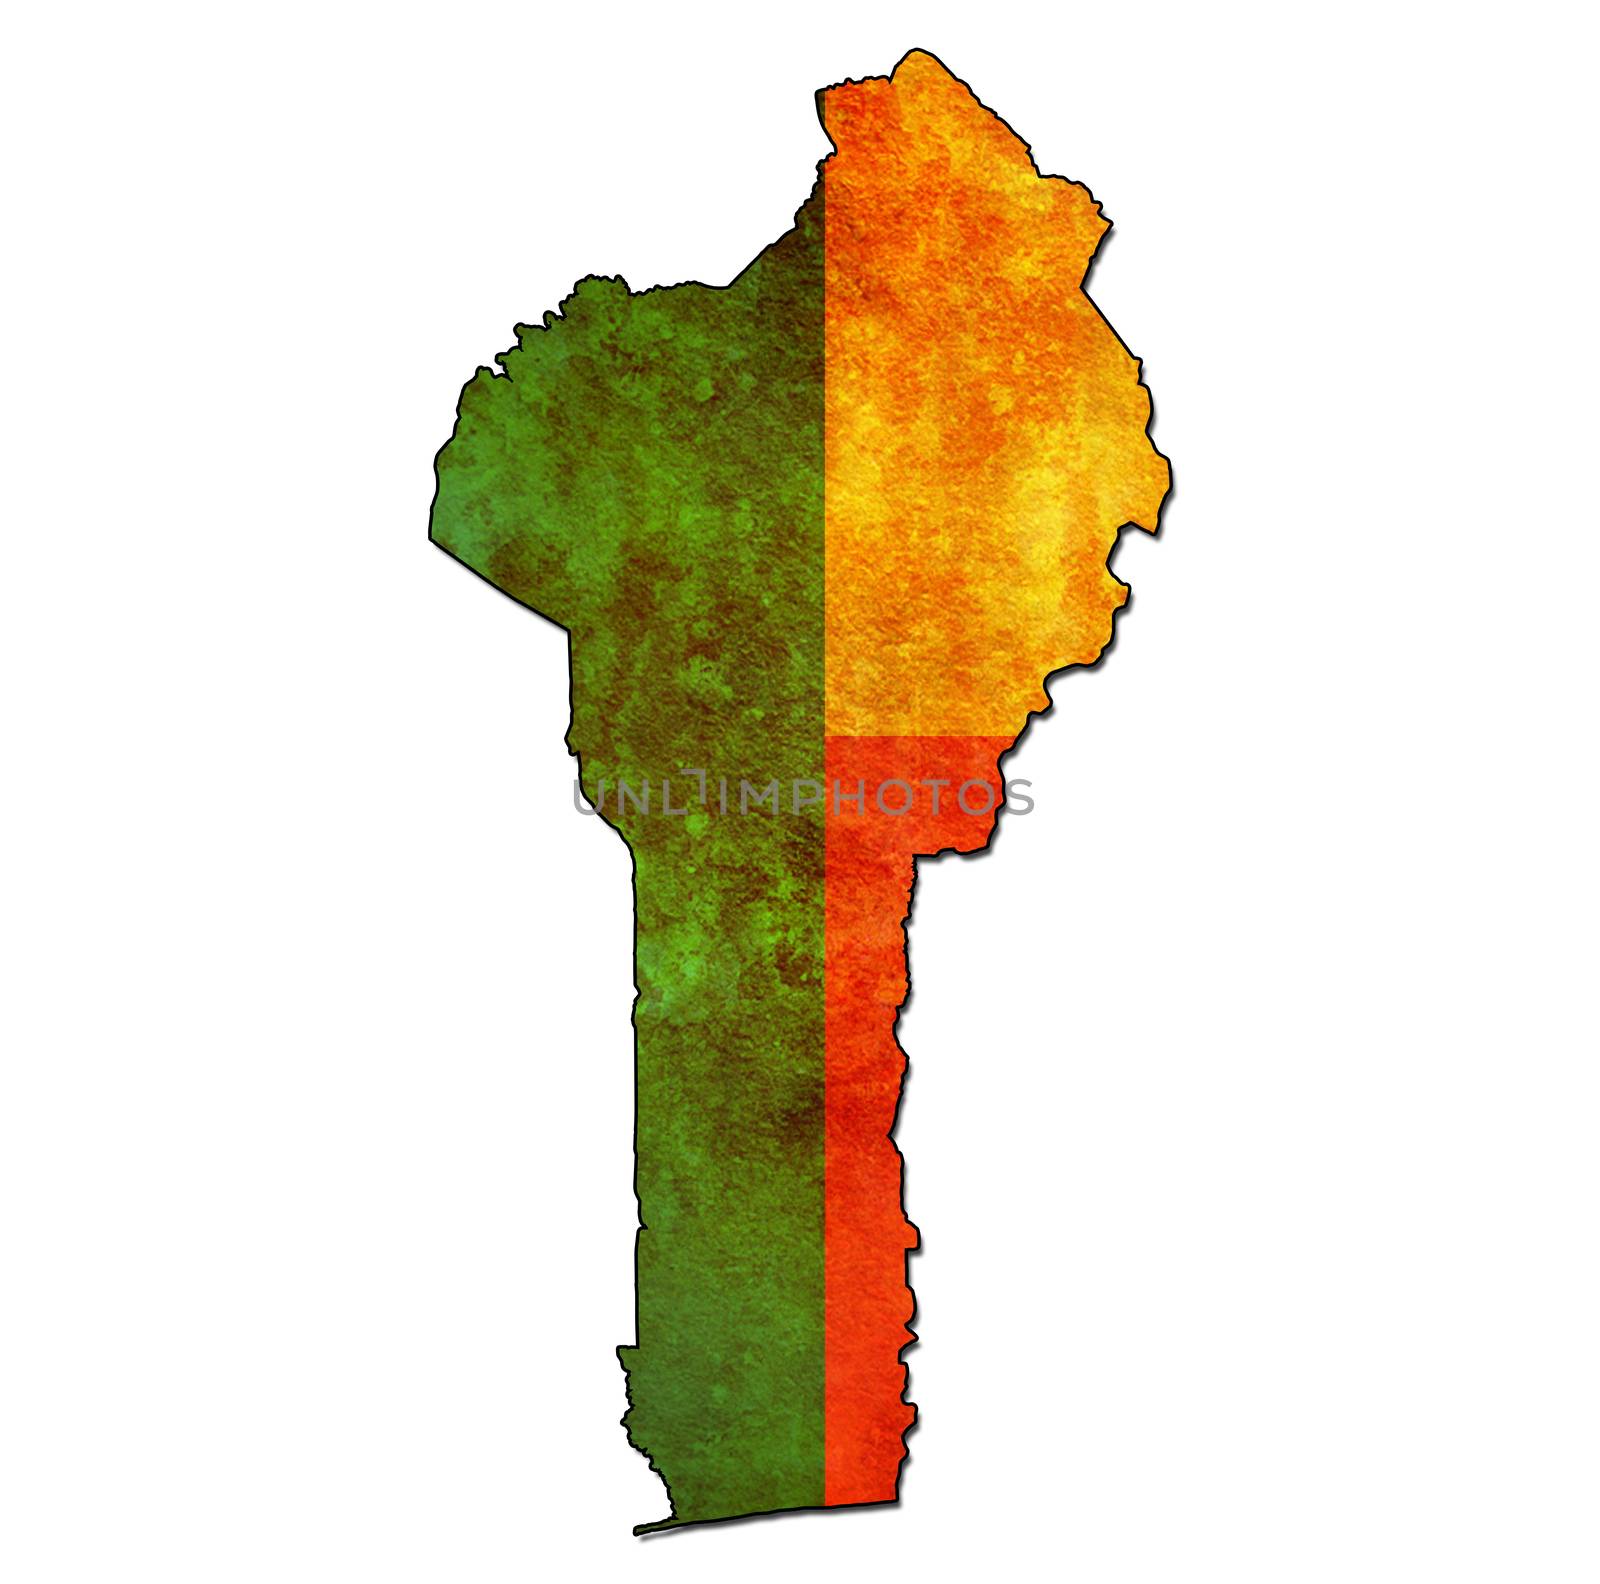 benin territory with flag by michal812